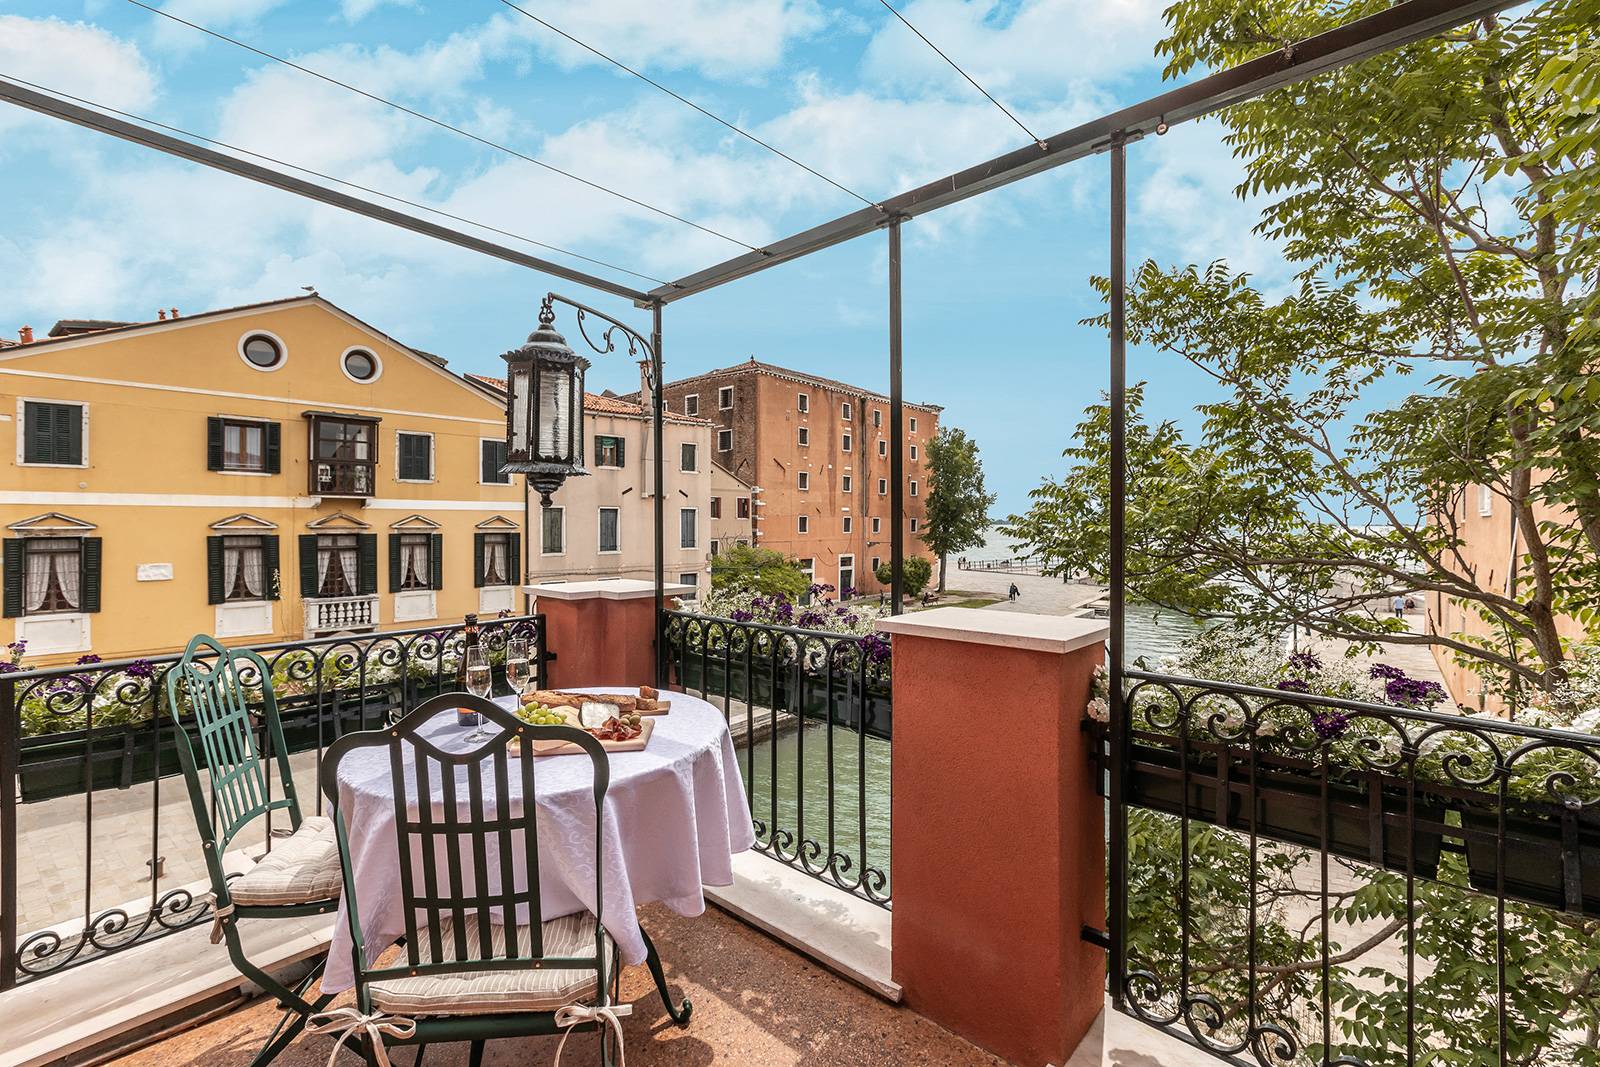 the Alcova apartment has a beautiful terrace with canal view